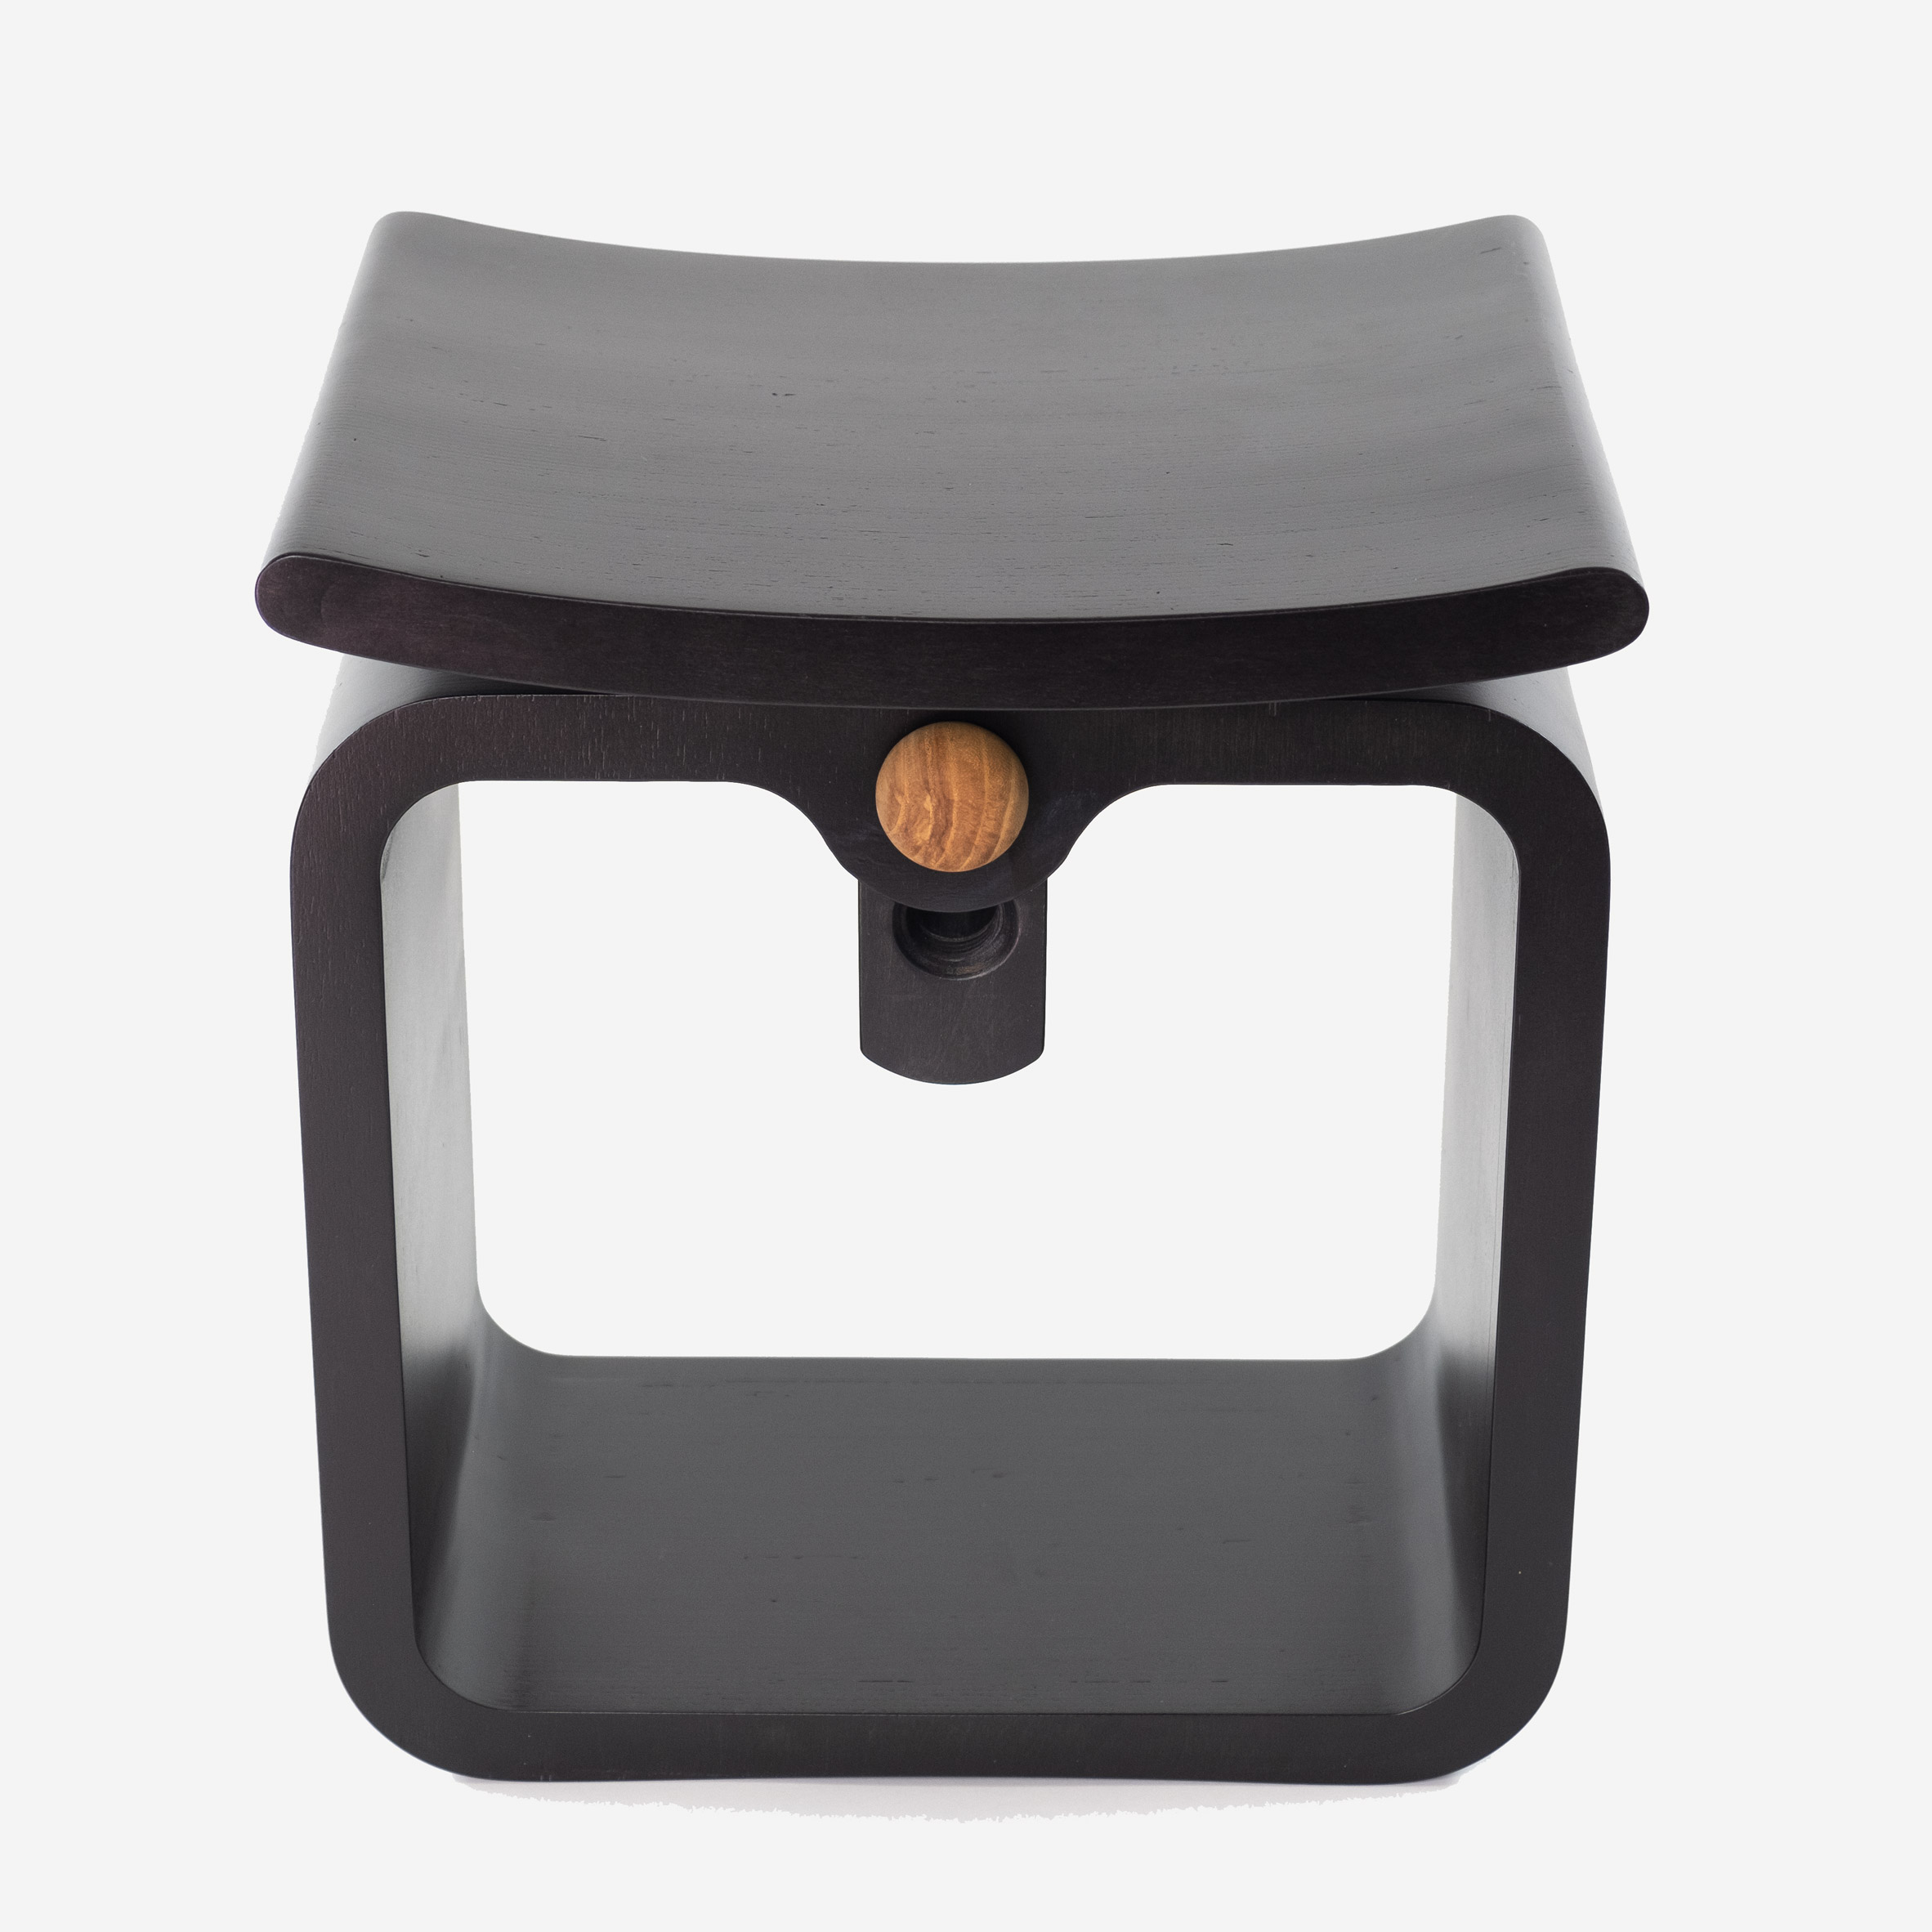 A black stool with a curved seat